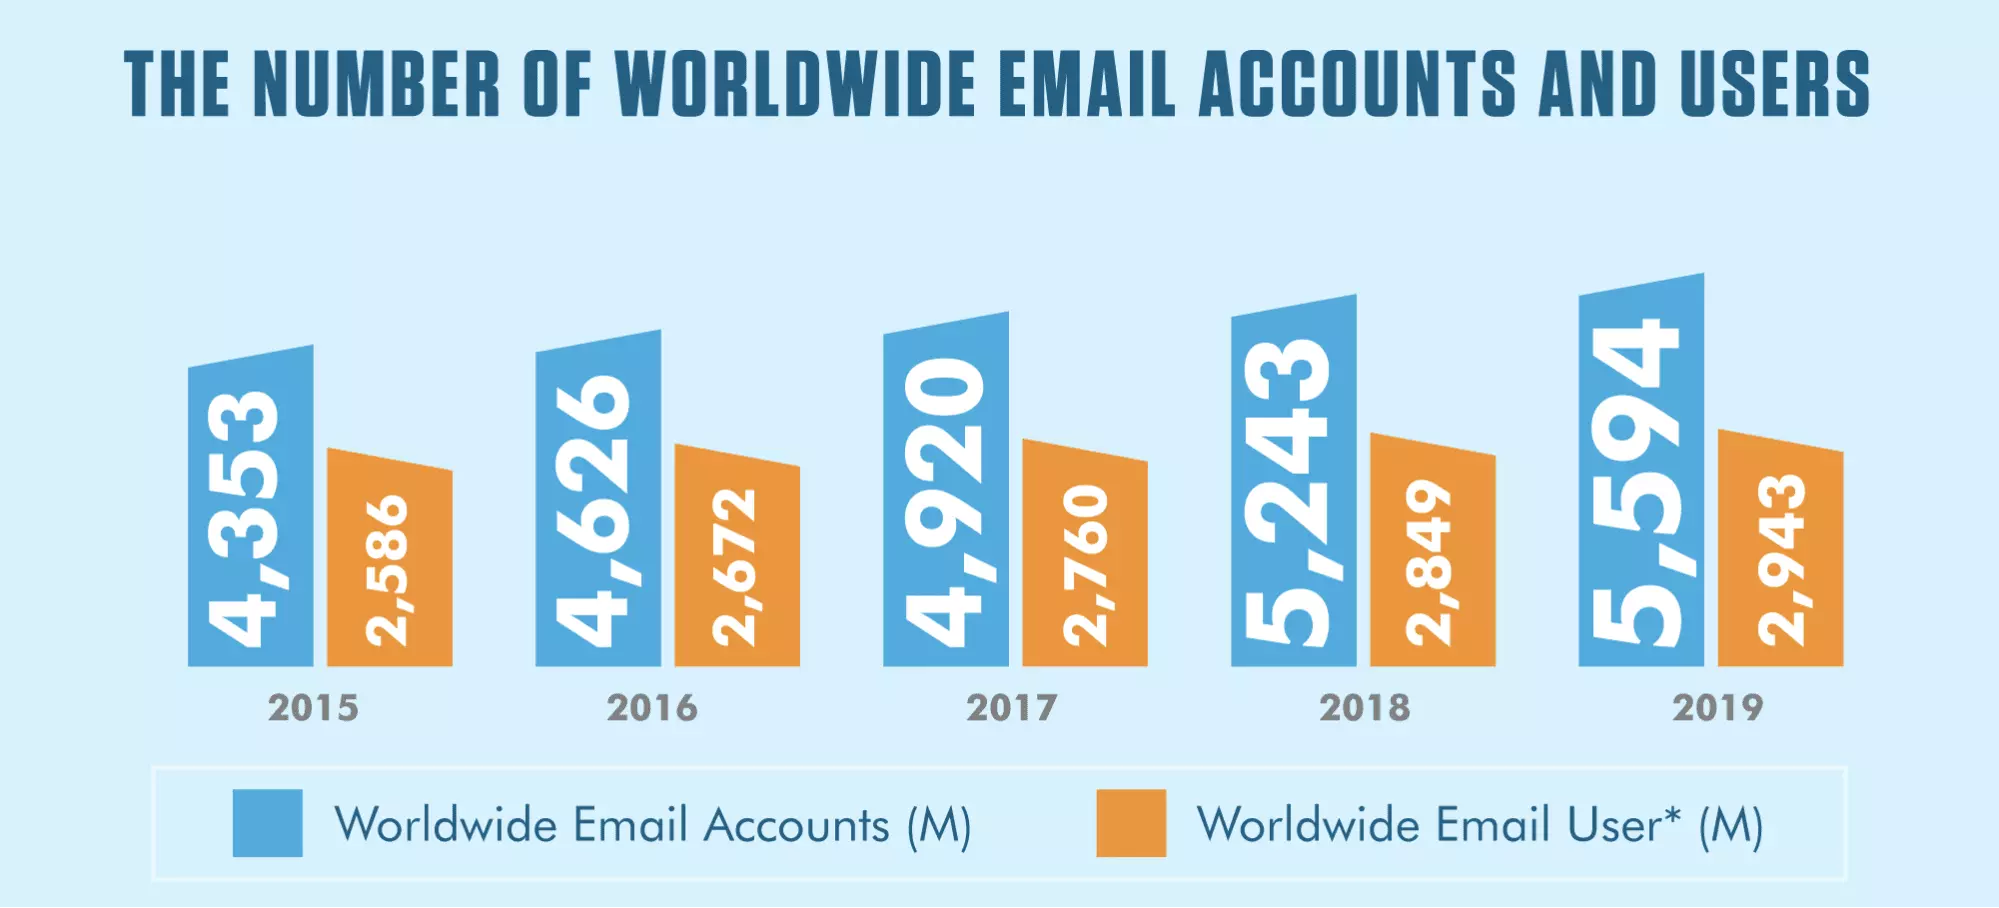 Number of worldwide email accounts and users